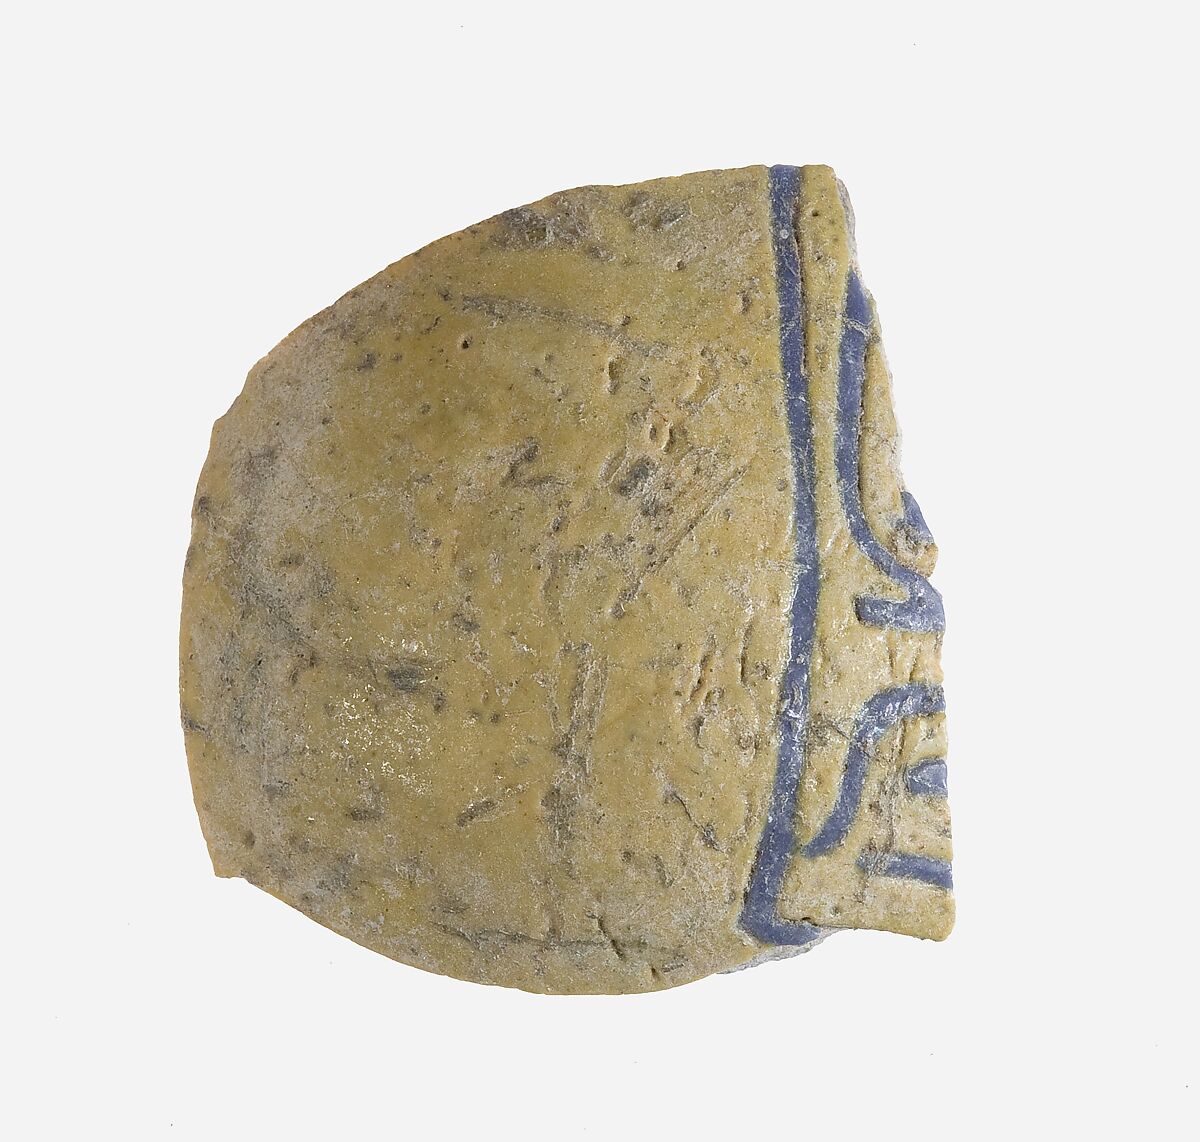 Inscribed Fragment of Vase, Faience 